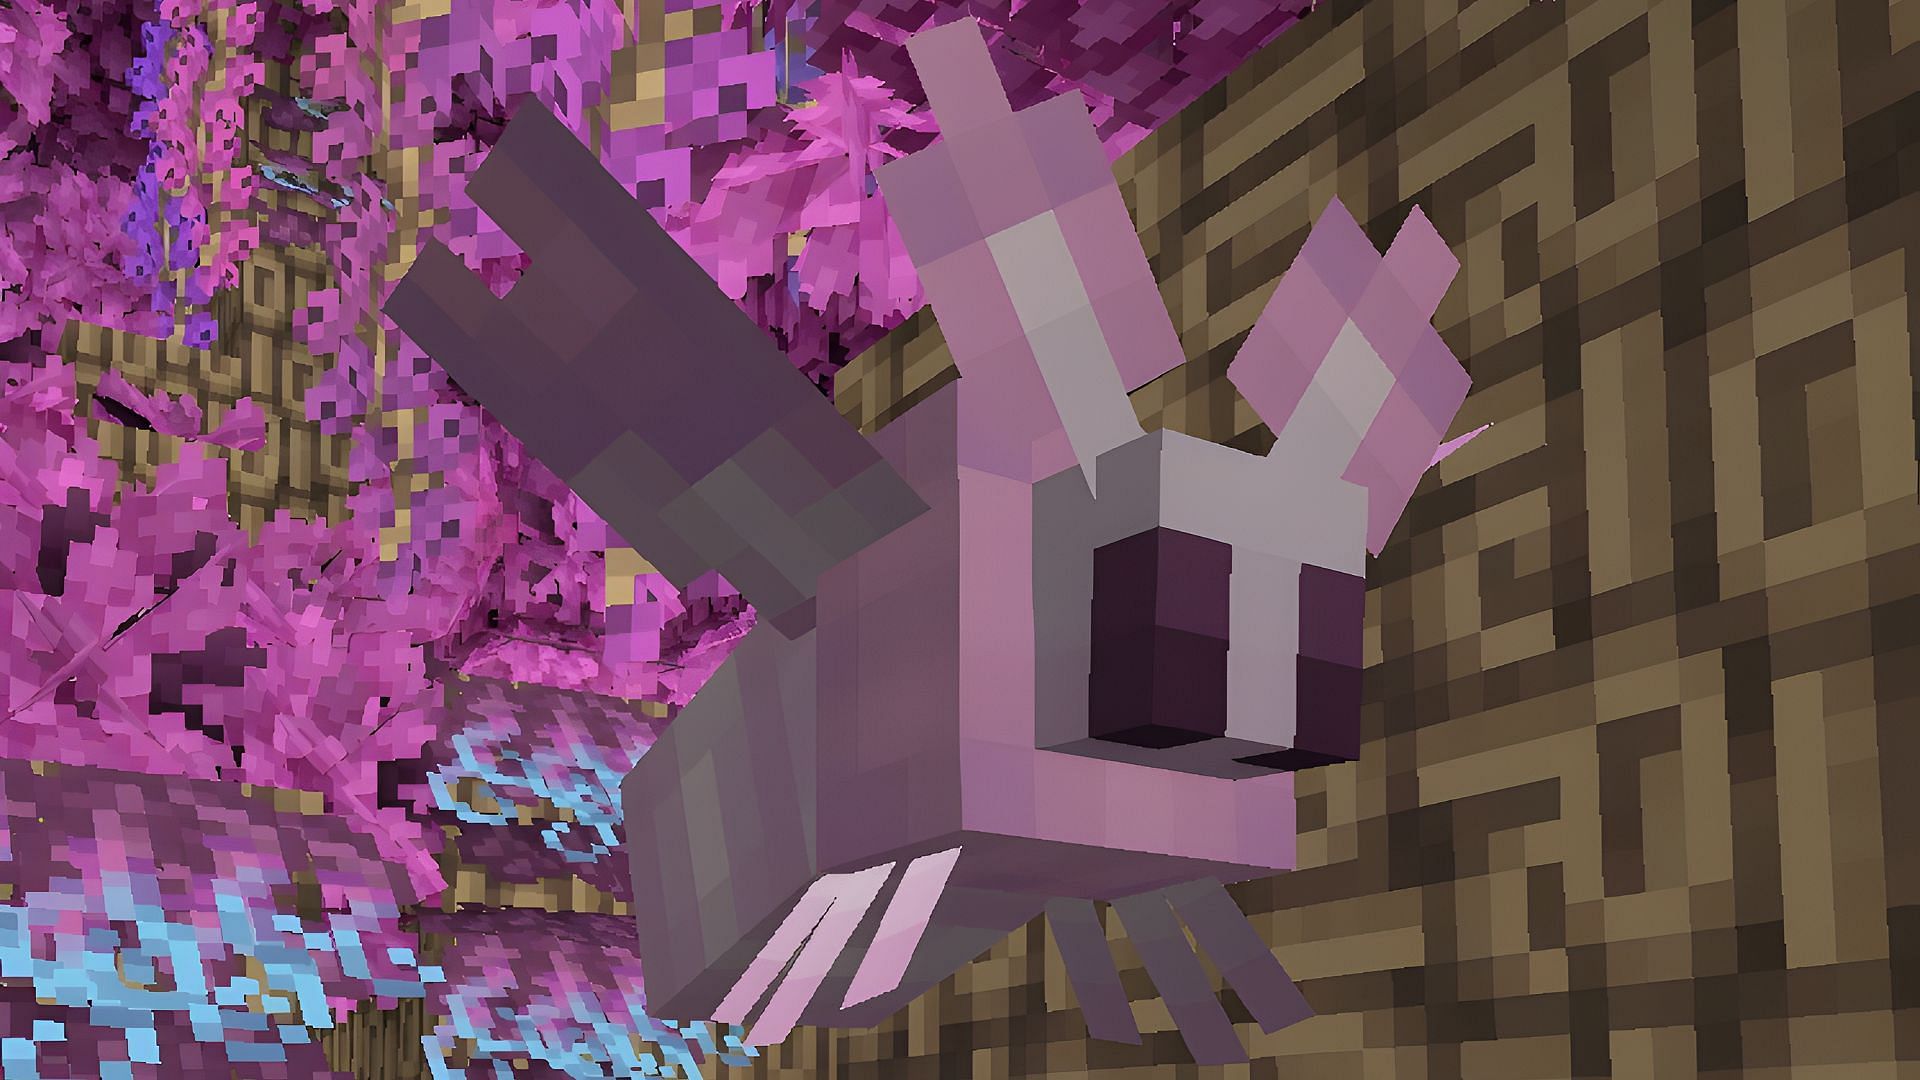 A silk moth in the BetterEnd mod for Minecraft (Image via Quiqueck/BetterEnd Wiki)